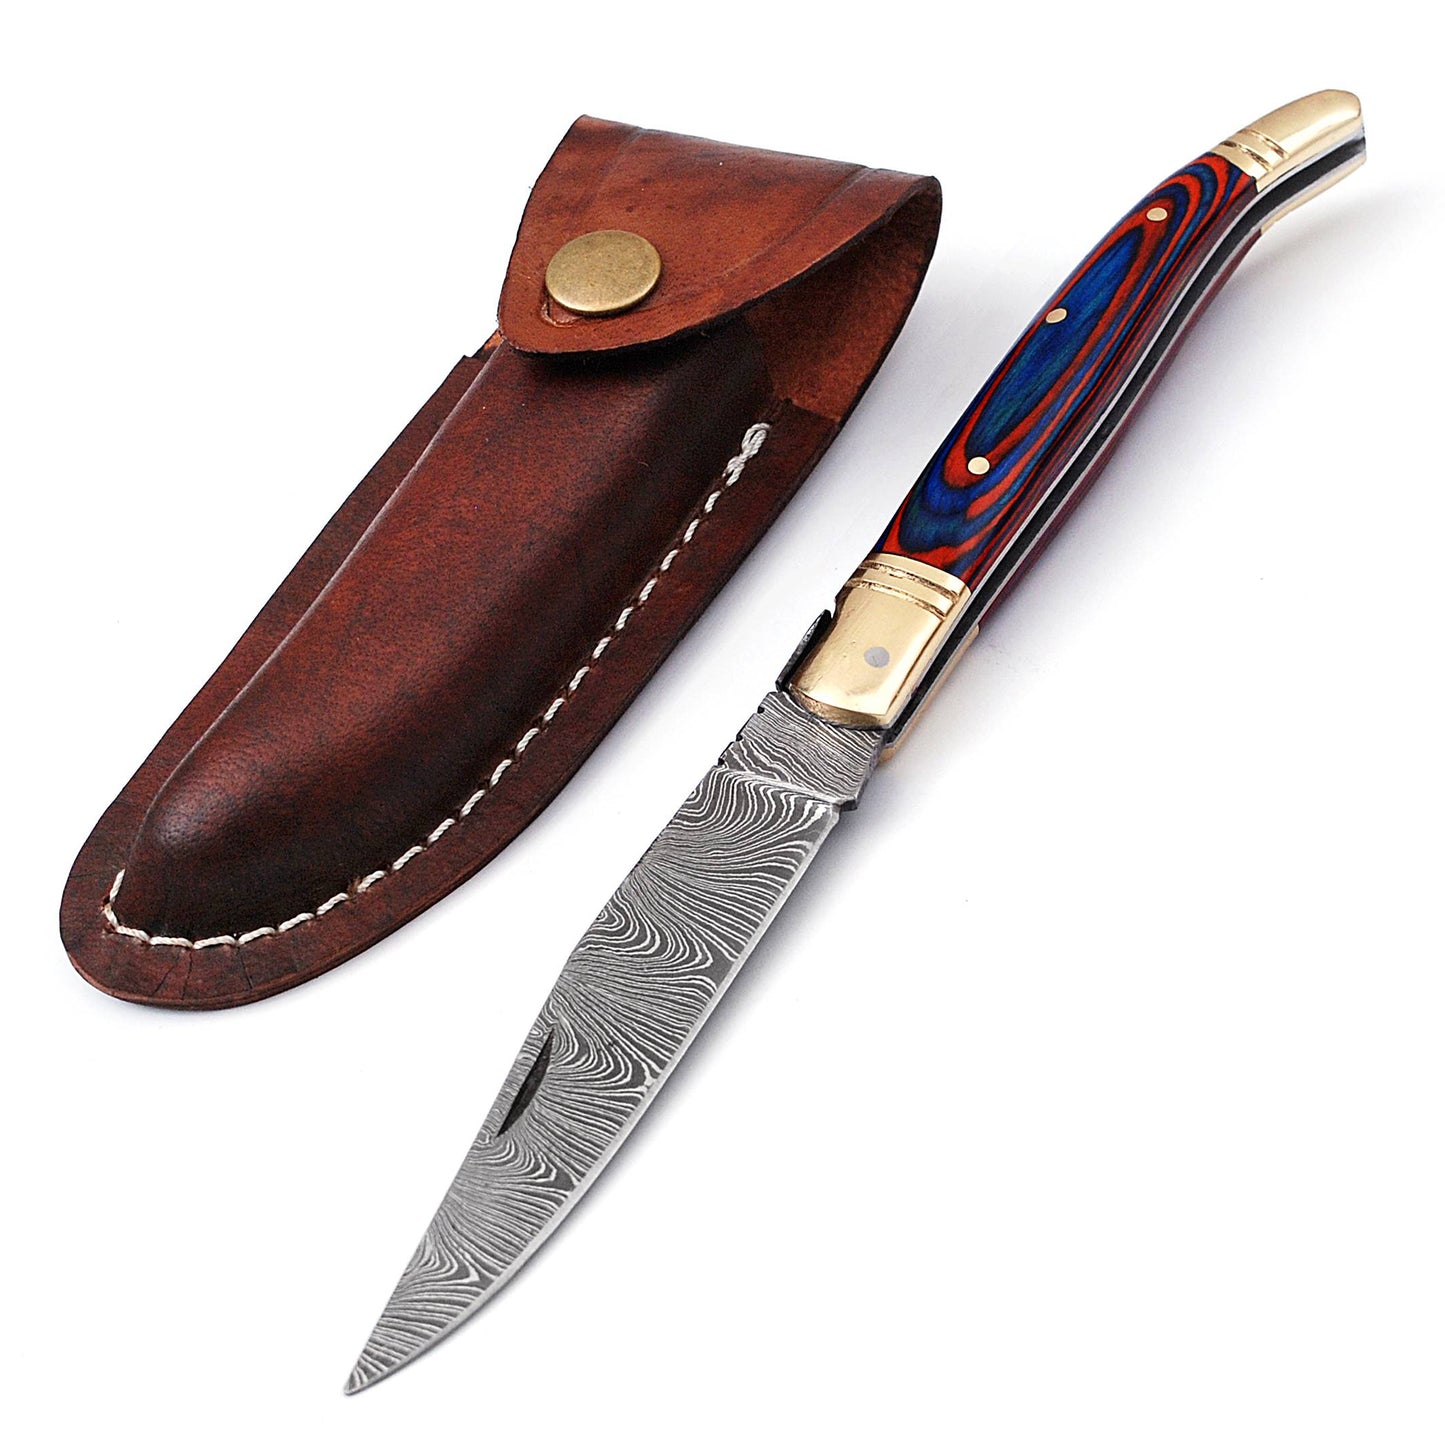 Copy of Laguiole Folding Damascus steel knife, 8.5" Long with 4" hand forged custom twist pattern Blade.Blue & Red wood scale with brass bolster, Cow hide leather sheath included